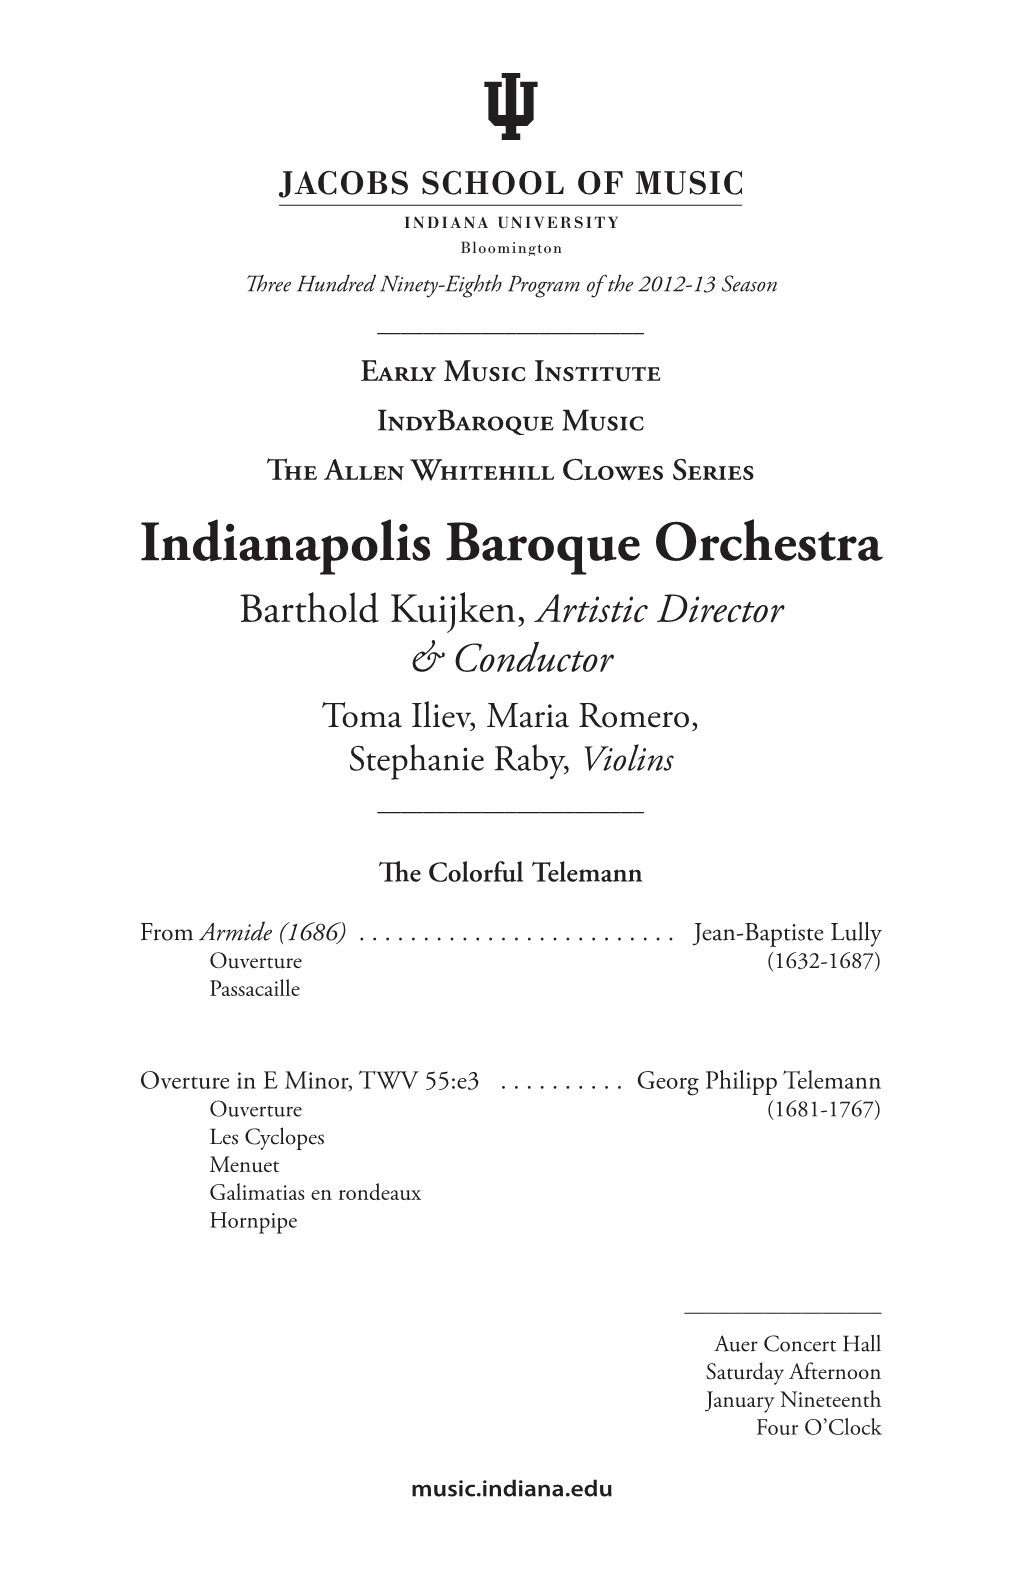 Indianapolis Baroque Orchestra Barthold Kuijken, Artistic Director & Conductor Toma Iliev, Maria Romero, Stephanie Raby, Violins ______